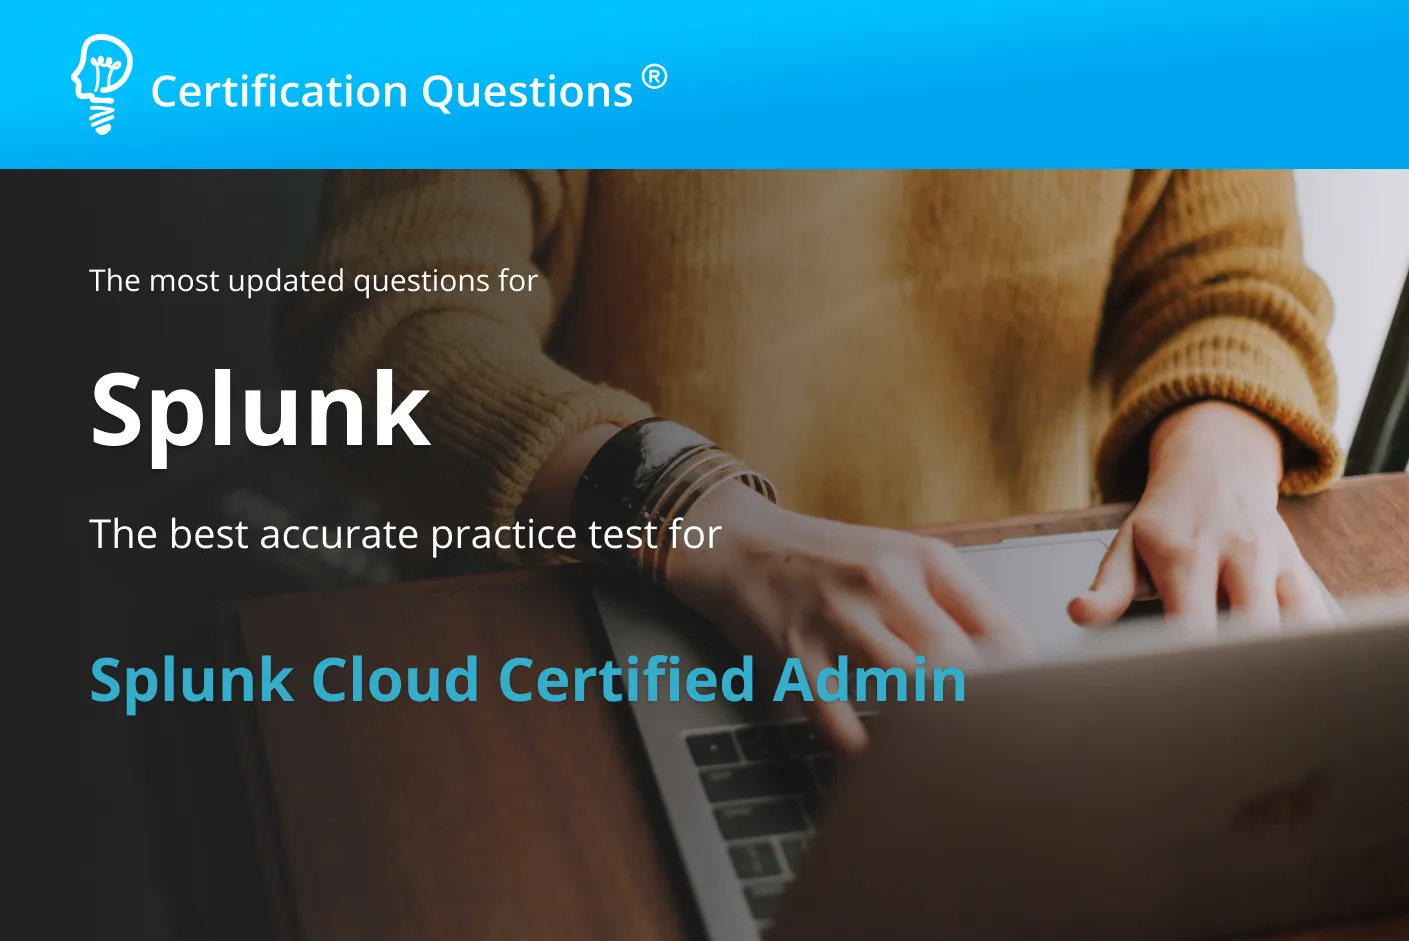 This image is related to Splunk User Certification Practice Test